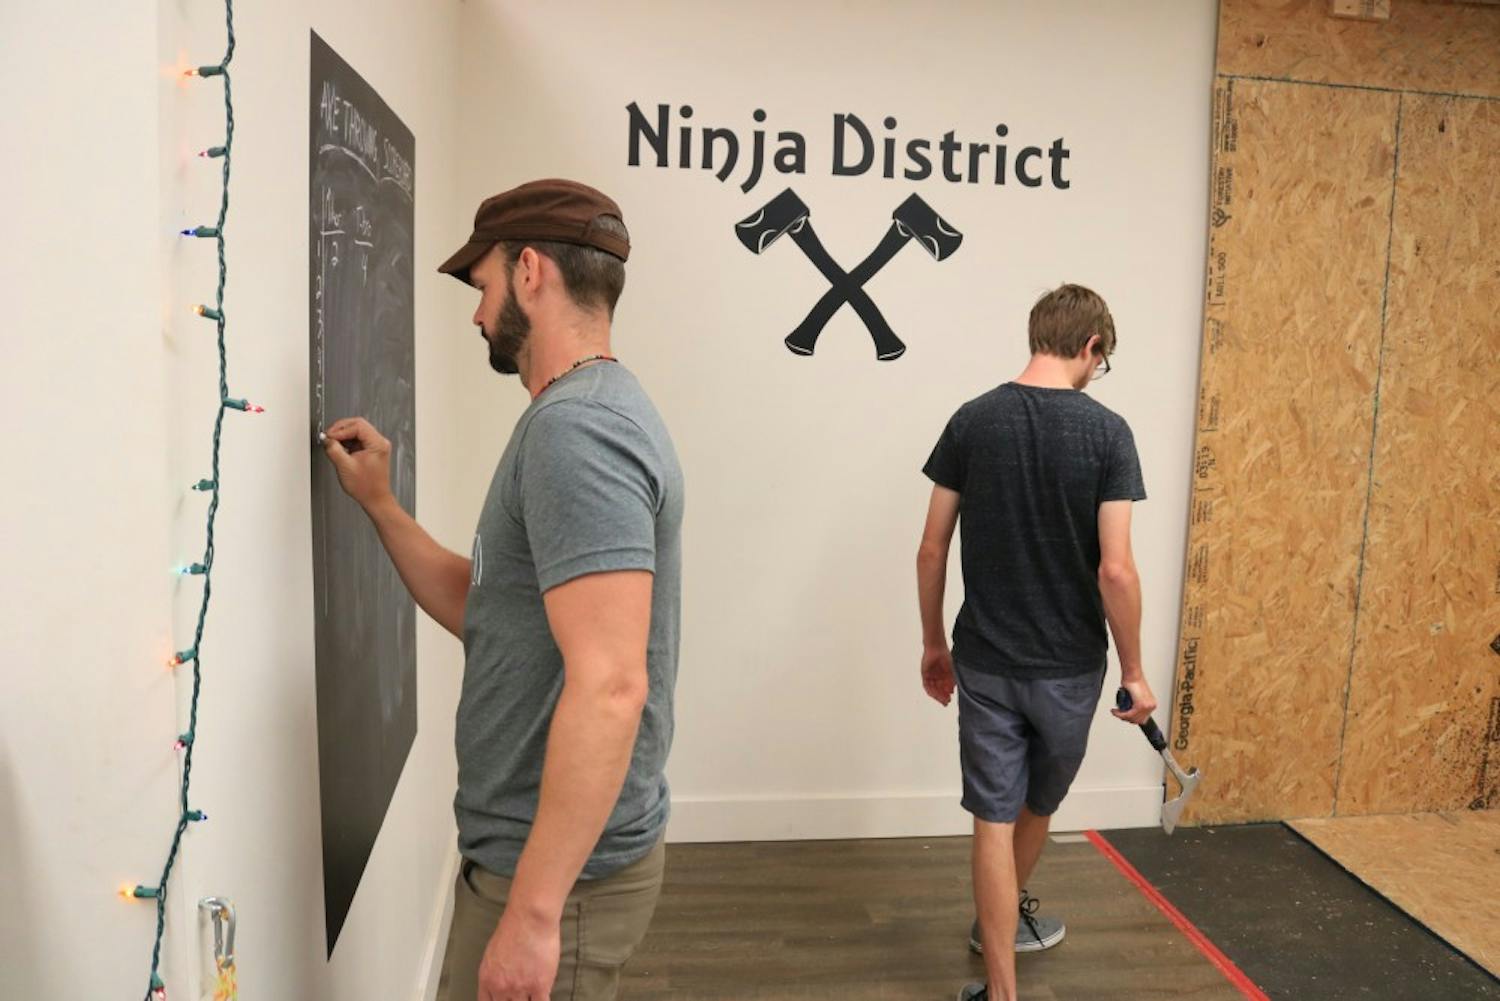 Axe-throwing in the Ninja District